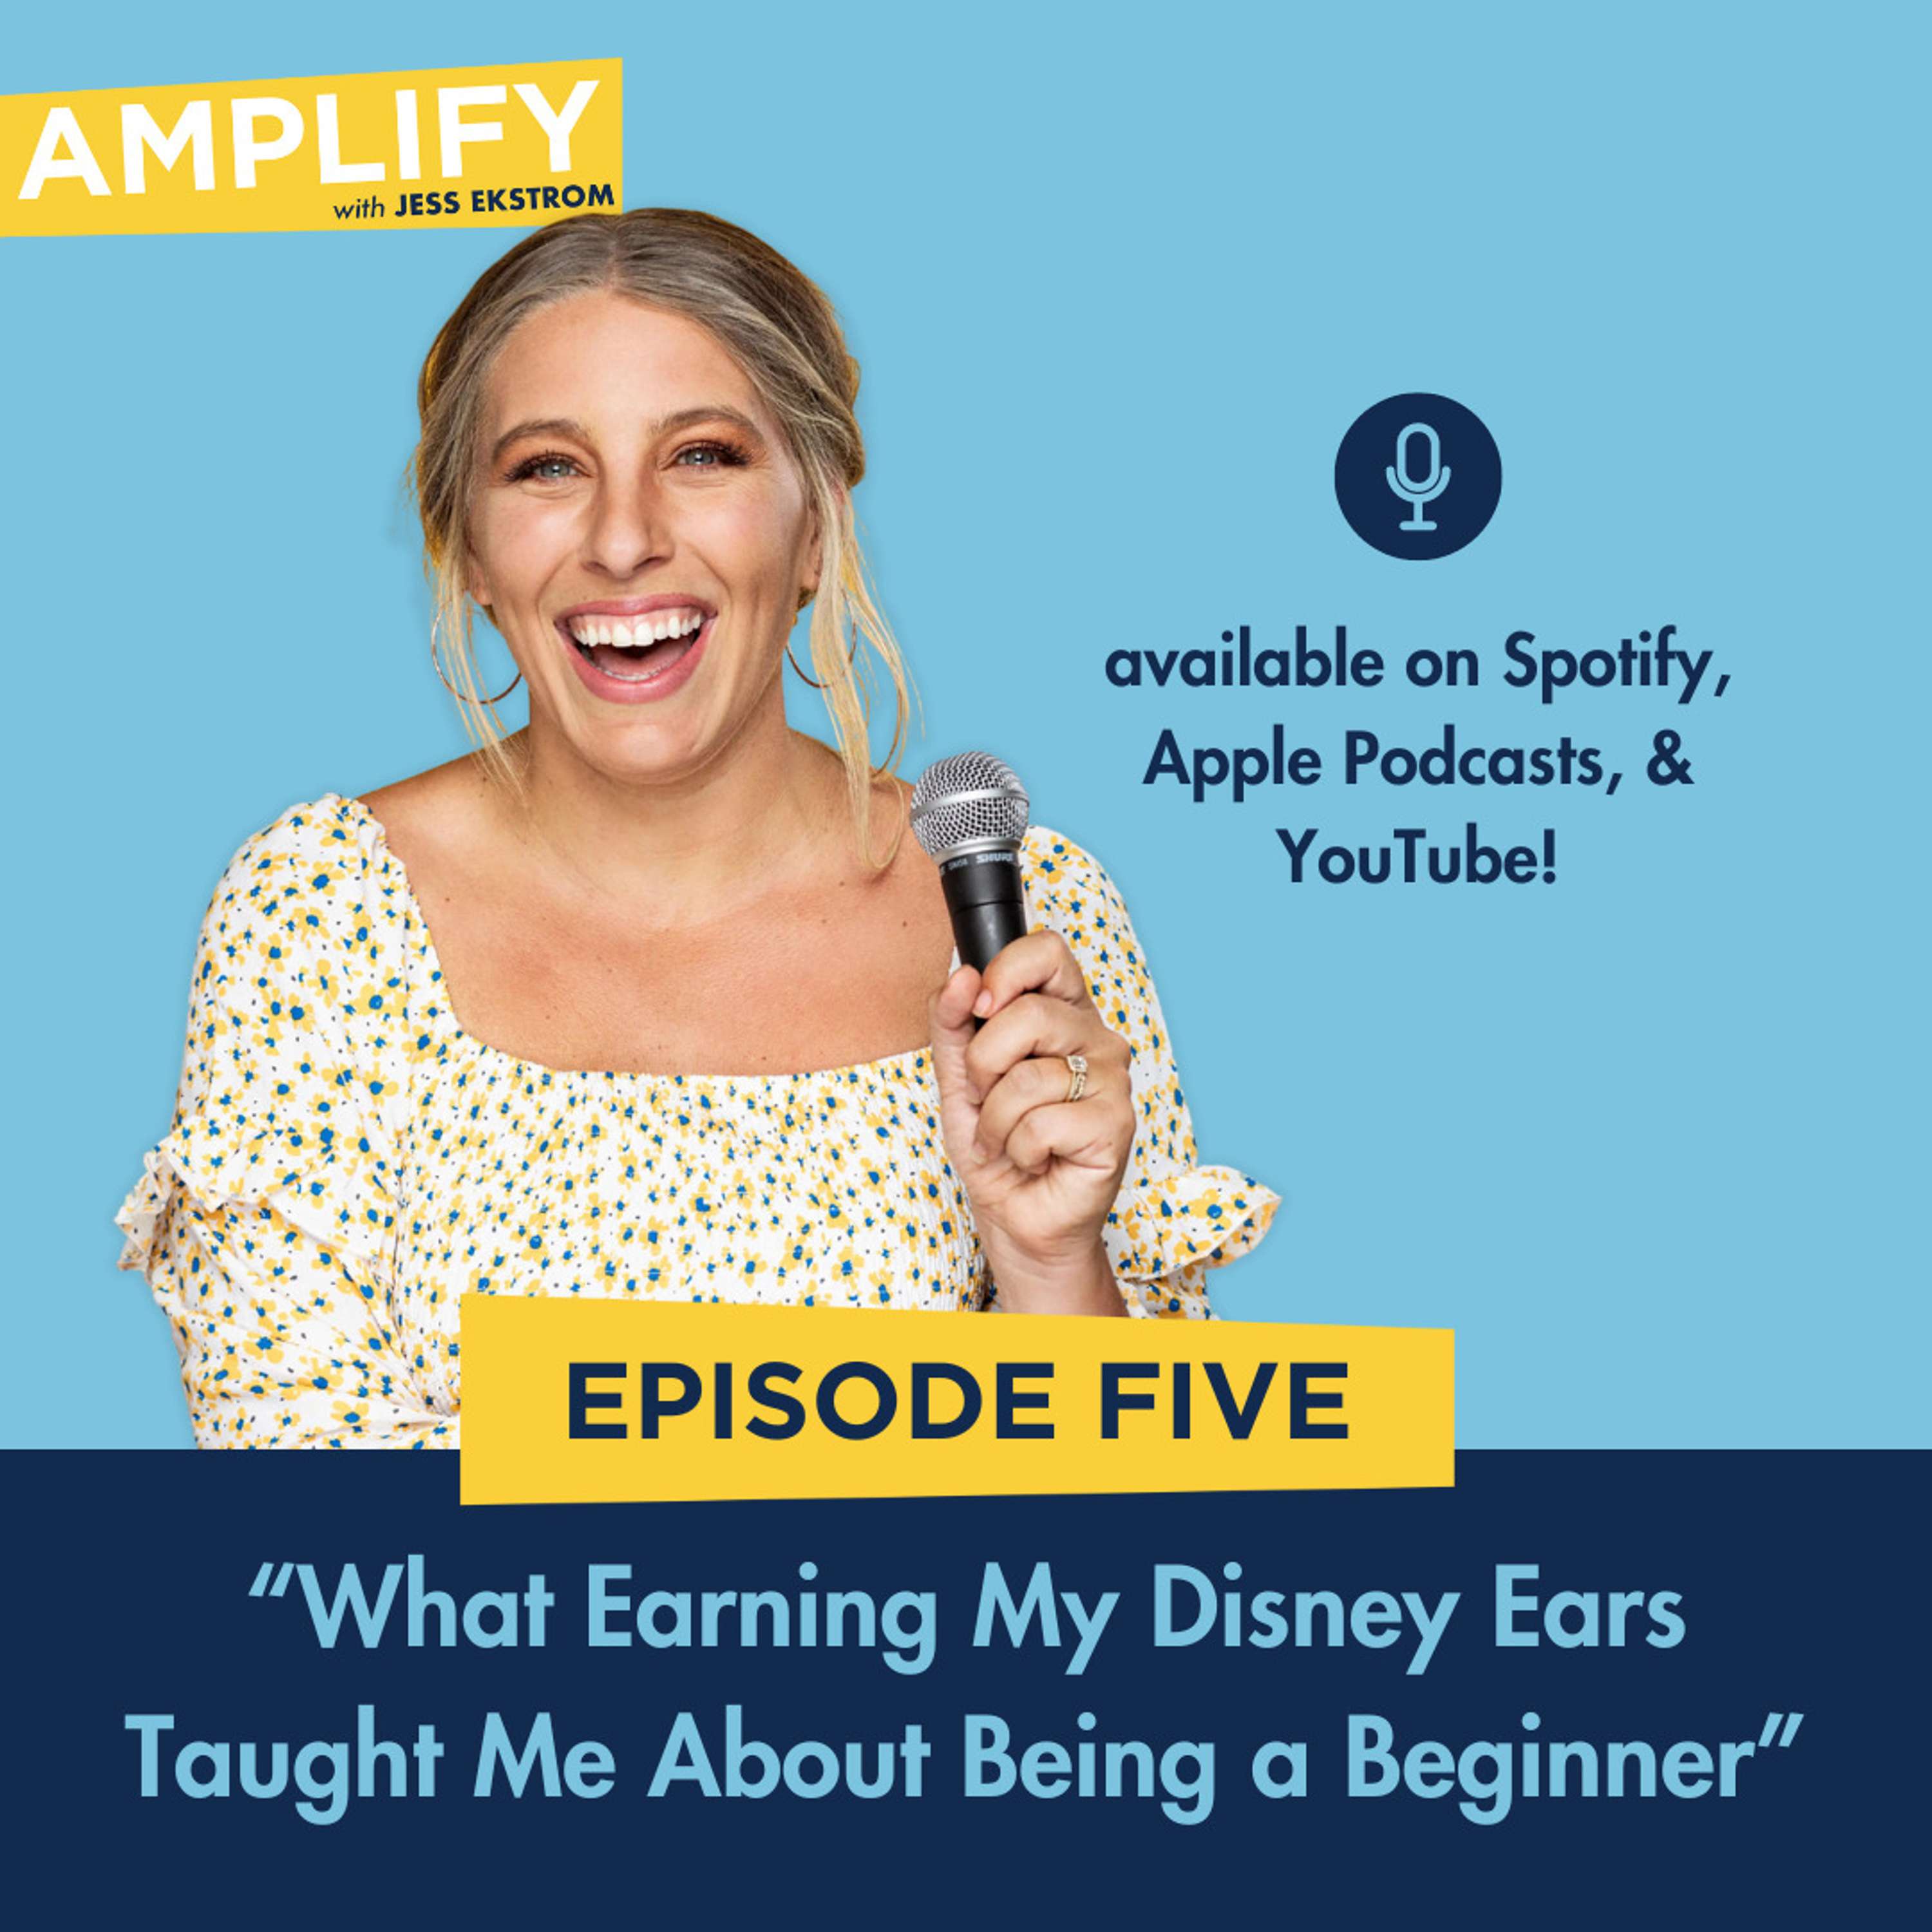 5. What Earning My Disney Ears Taught Me About Being a Beginner